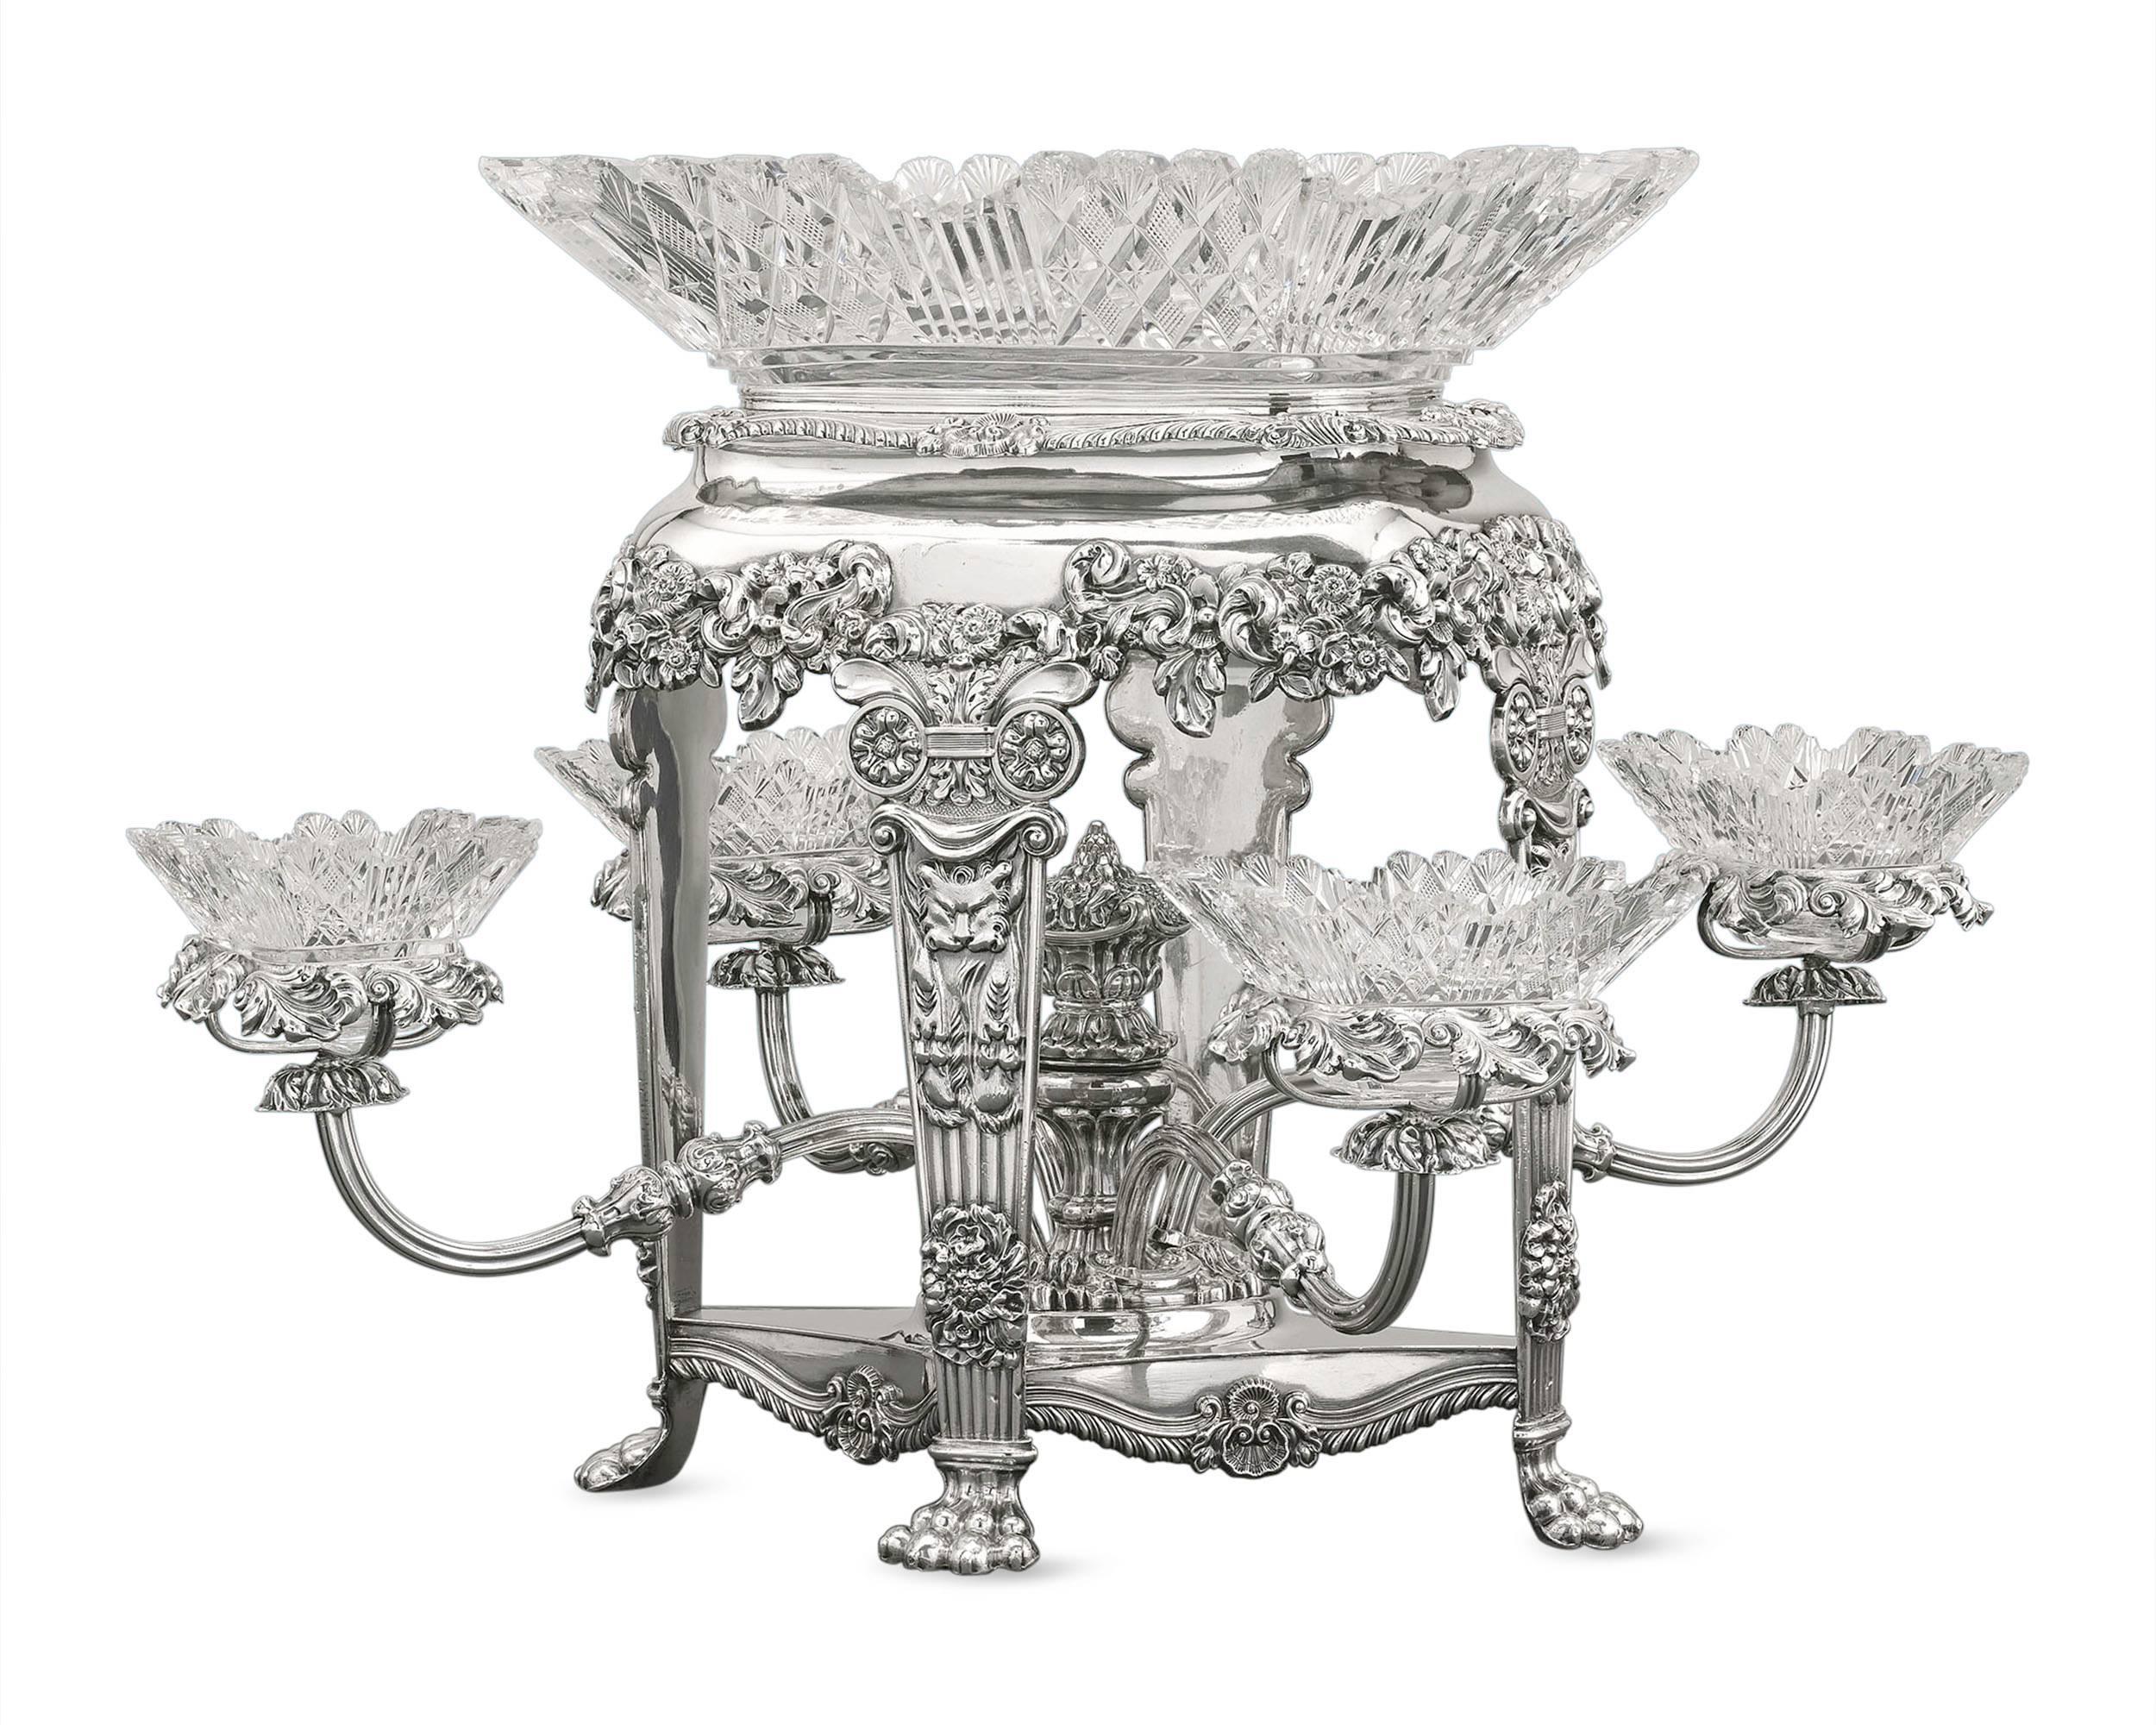 This elegant epergne is a monumental masterpiece of desirable Sheffield silver plate design. The perfect complement to any fine dining affair, the Regency period stand features a large bowl of etched glass surrounded by four circular dishes